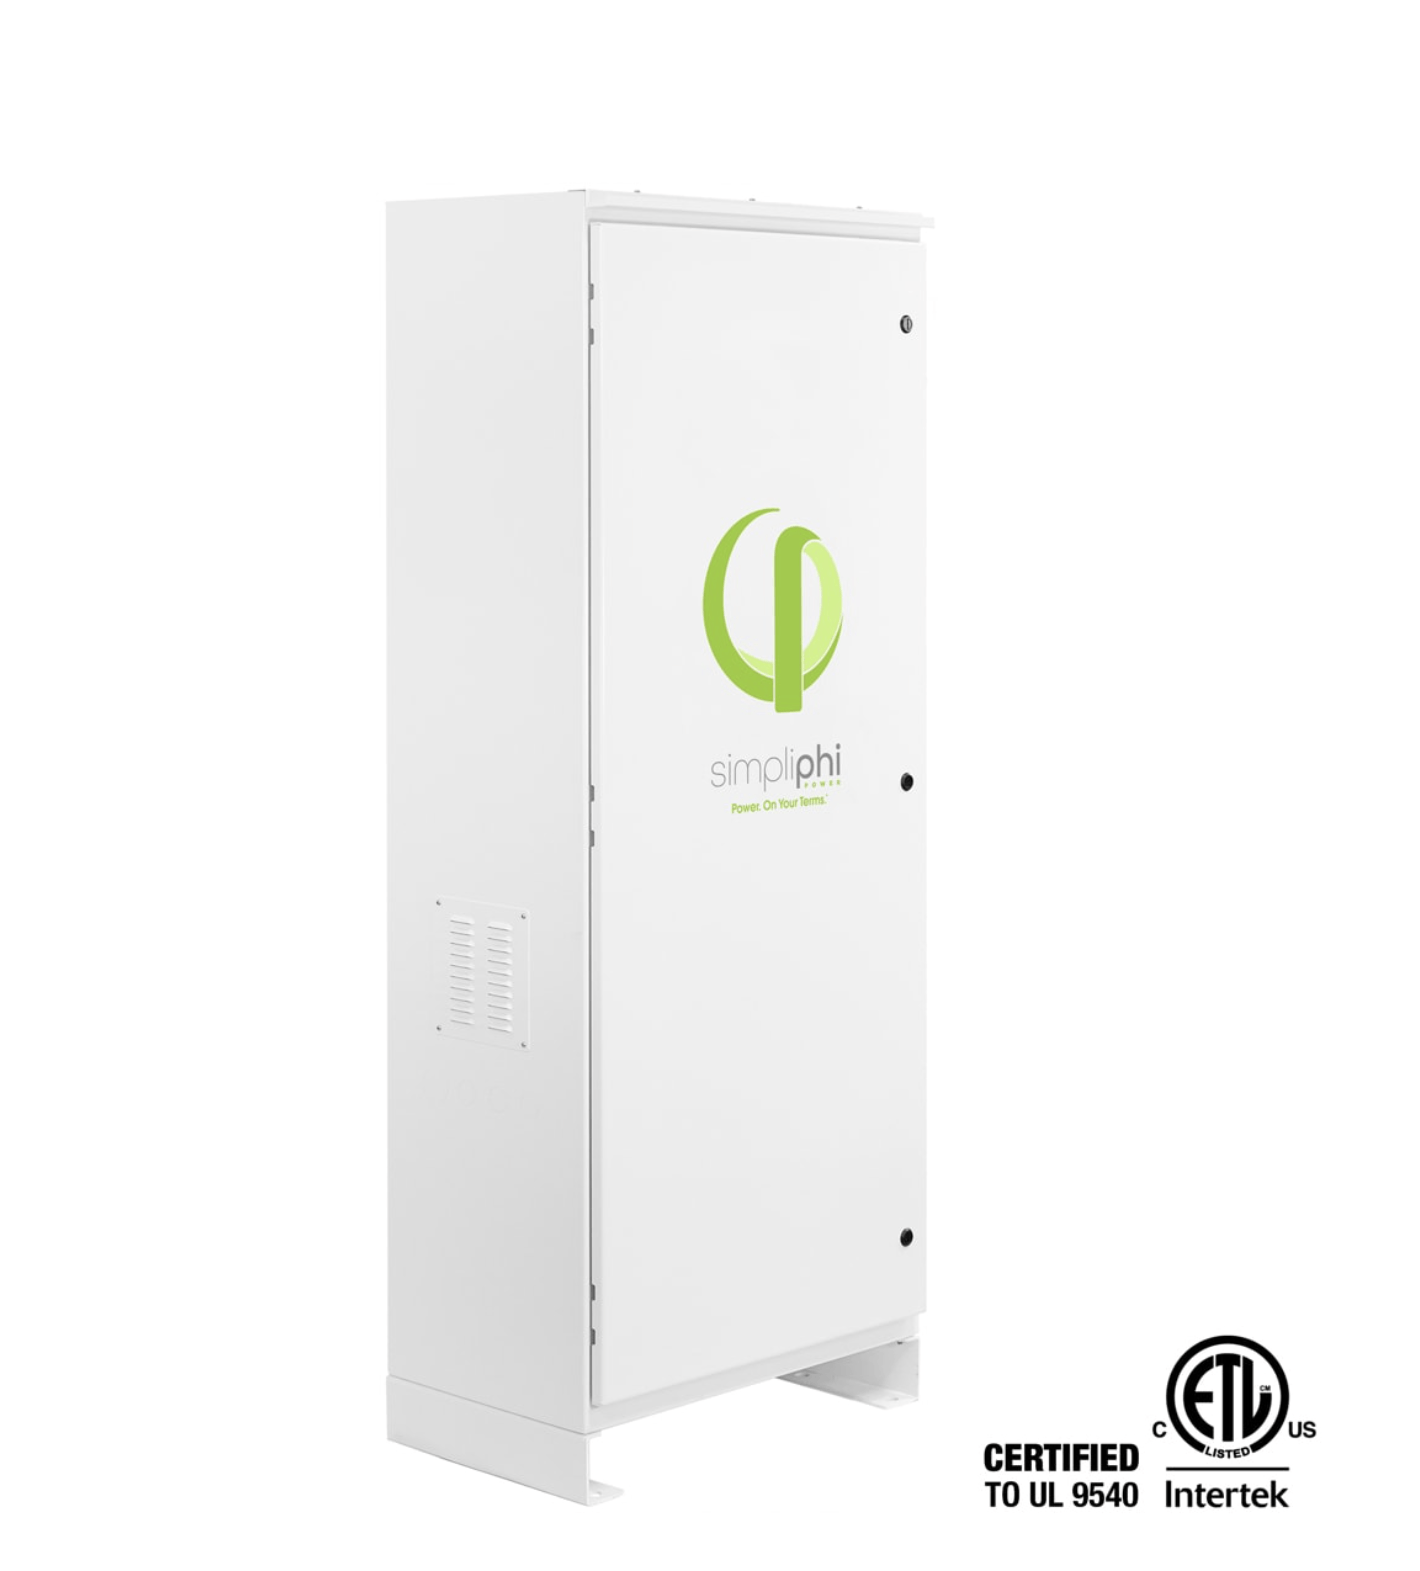 Add SimpliPhi Power AccESS Energy Storage to Your Georgia Home With GenSpring Power, Inc.